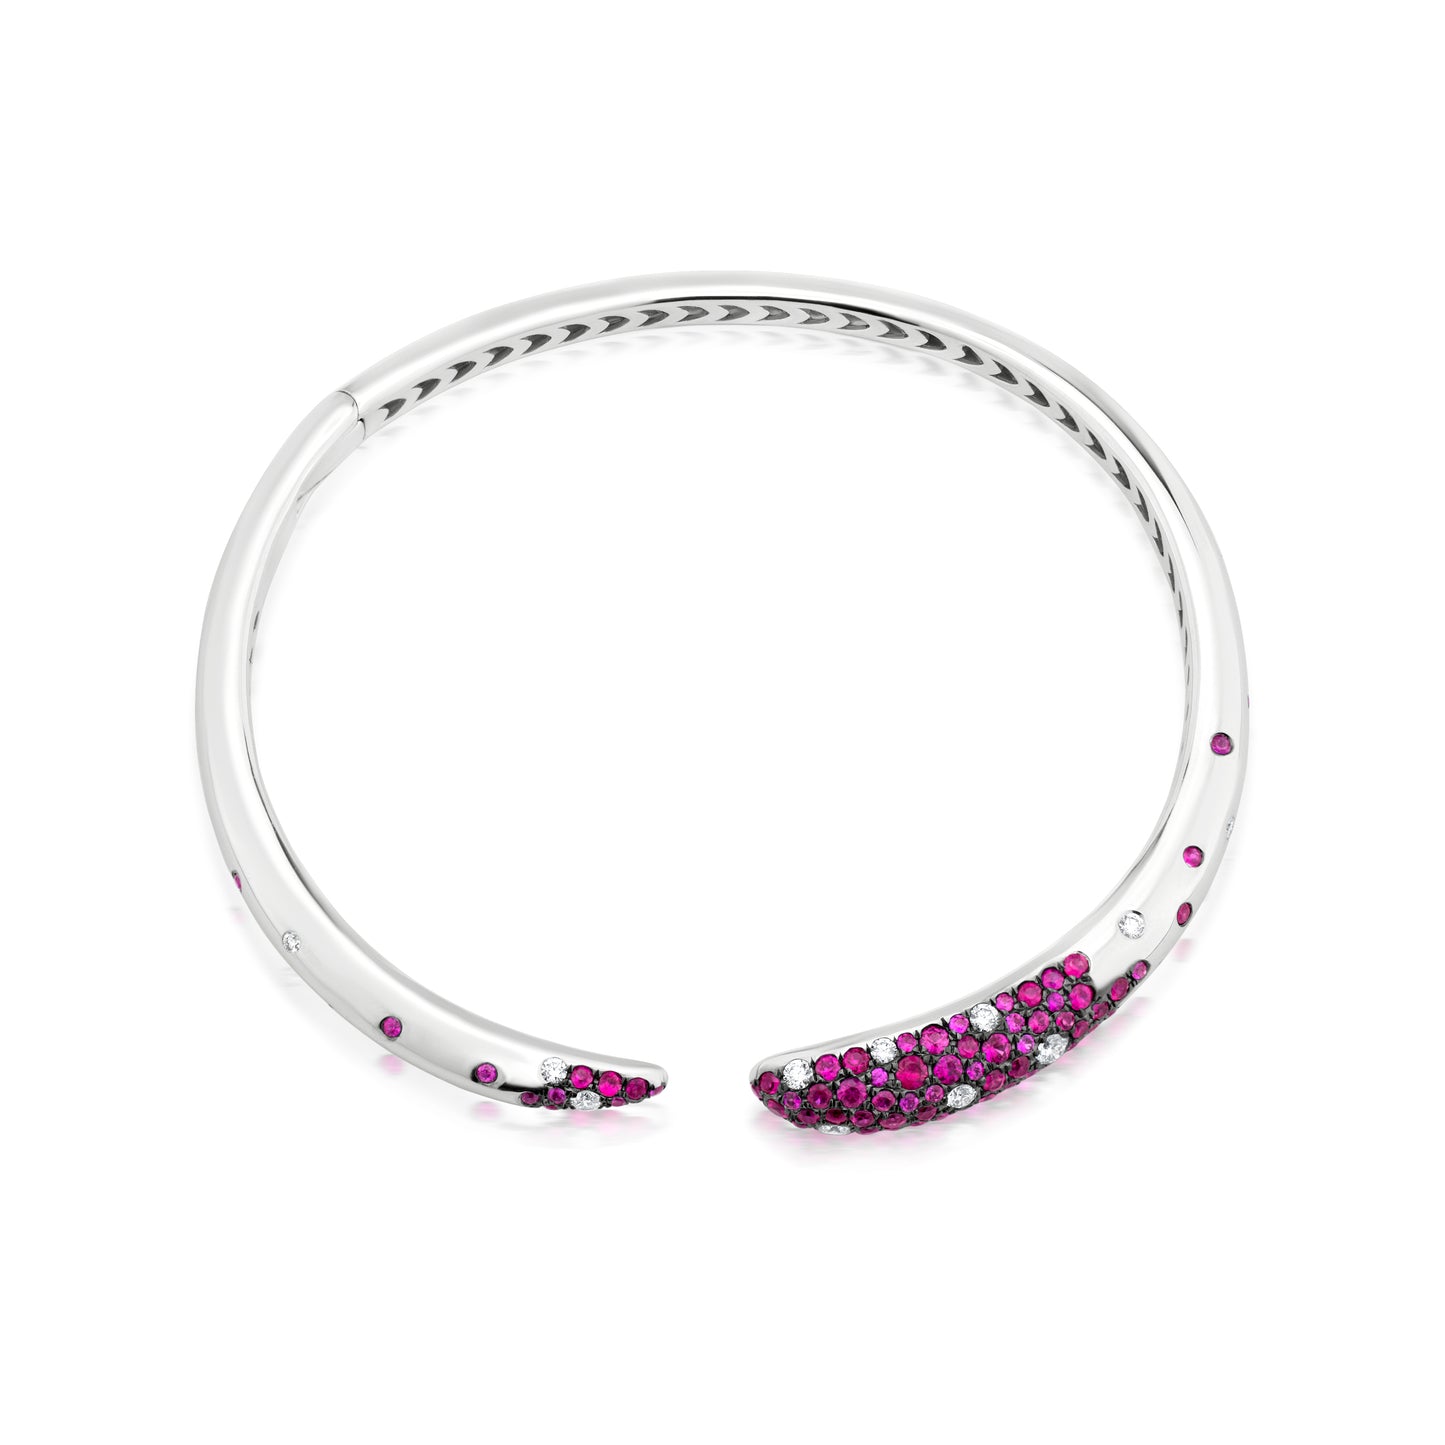 Bangle With Ruby And Diamond In 18K White Gold And Black Rhodium